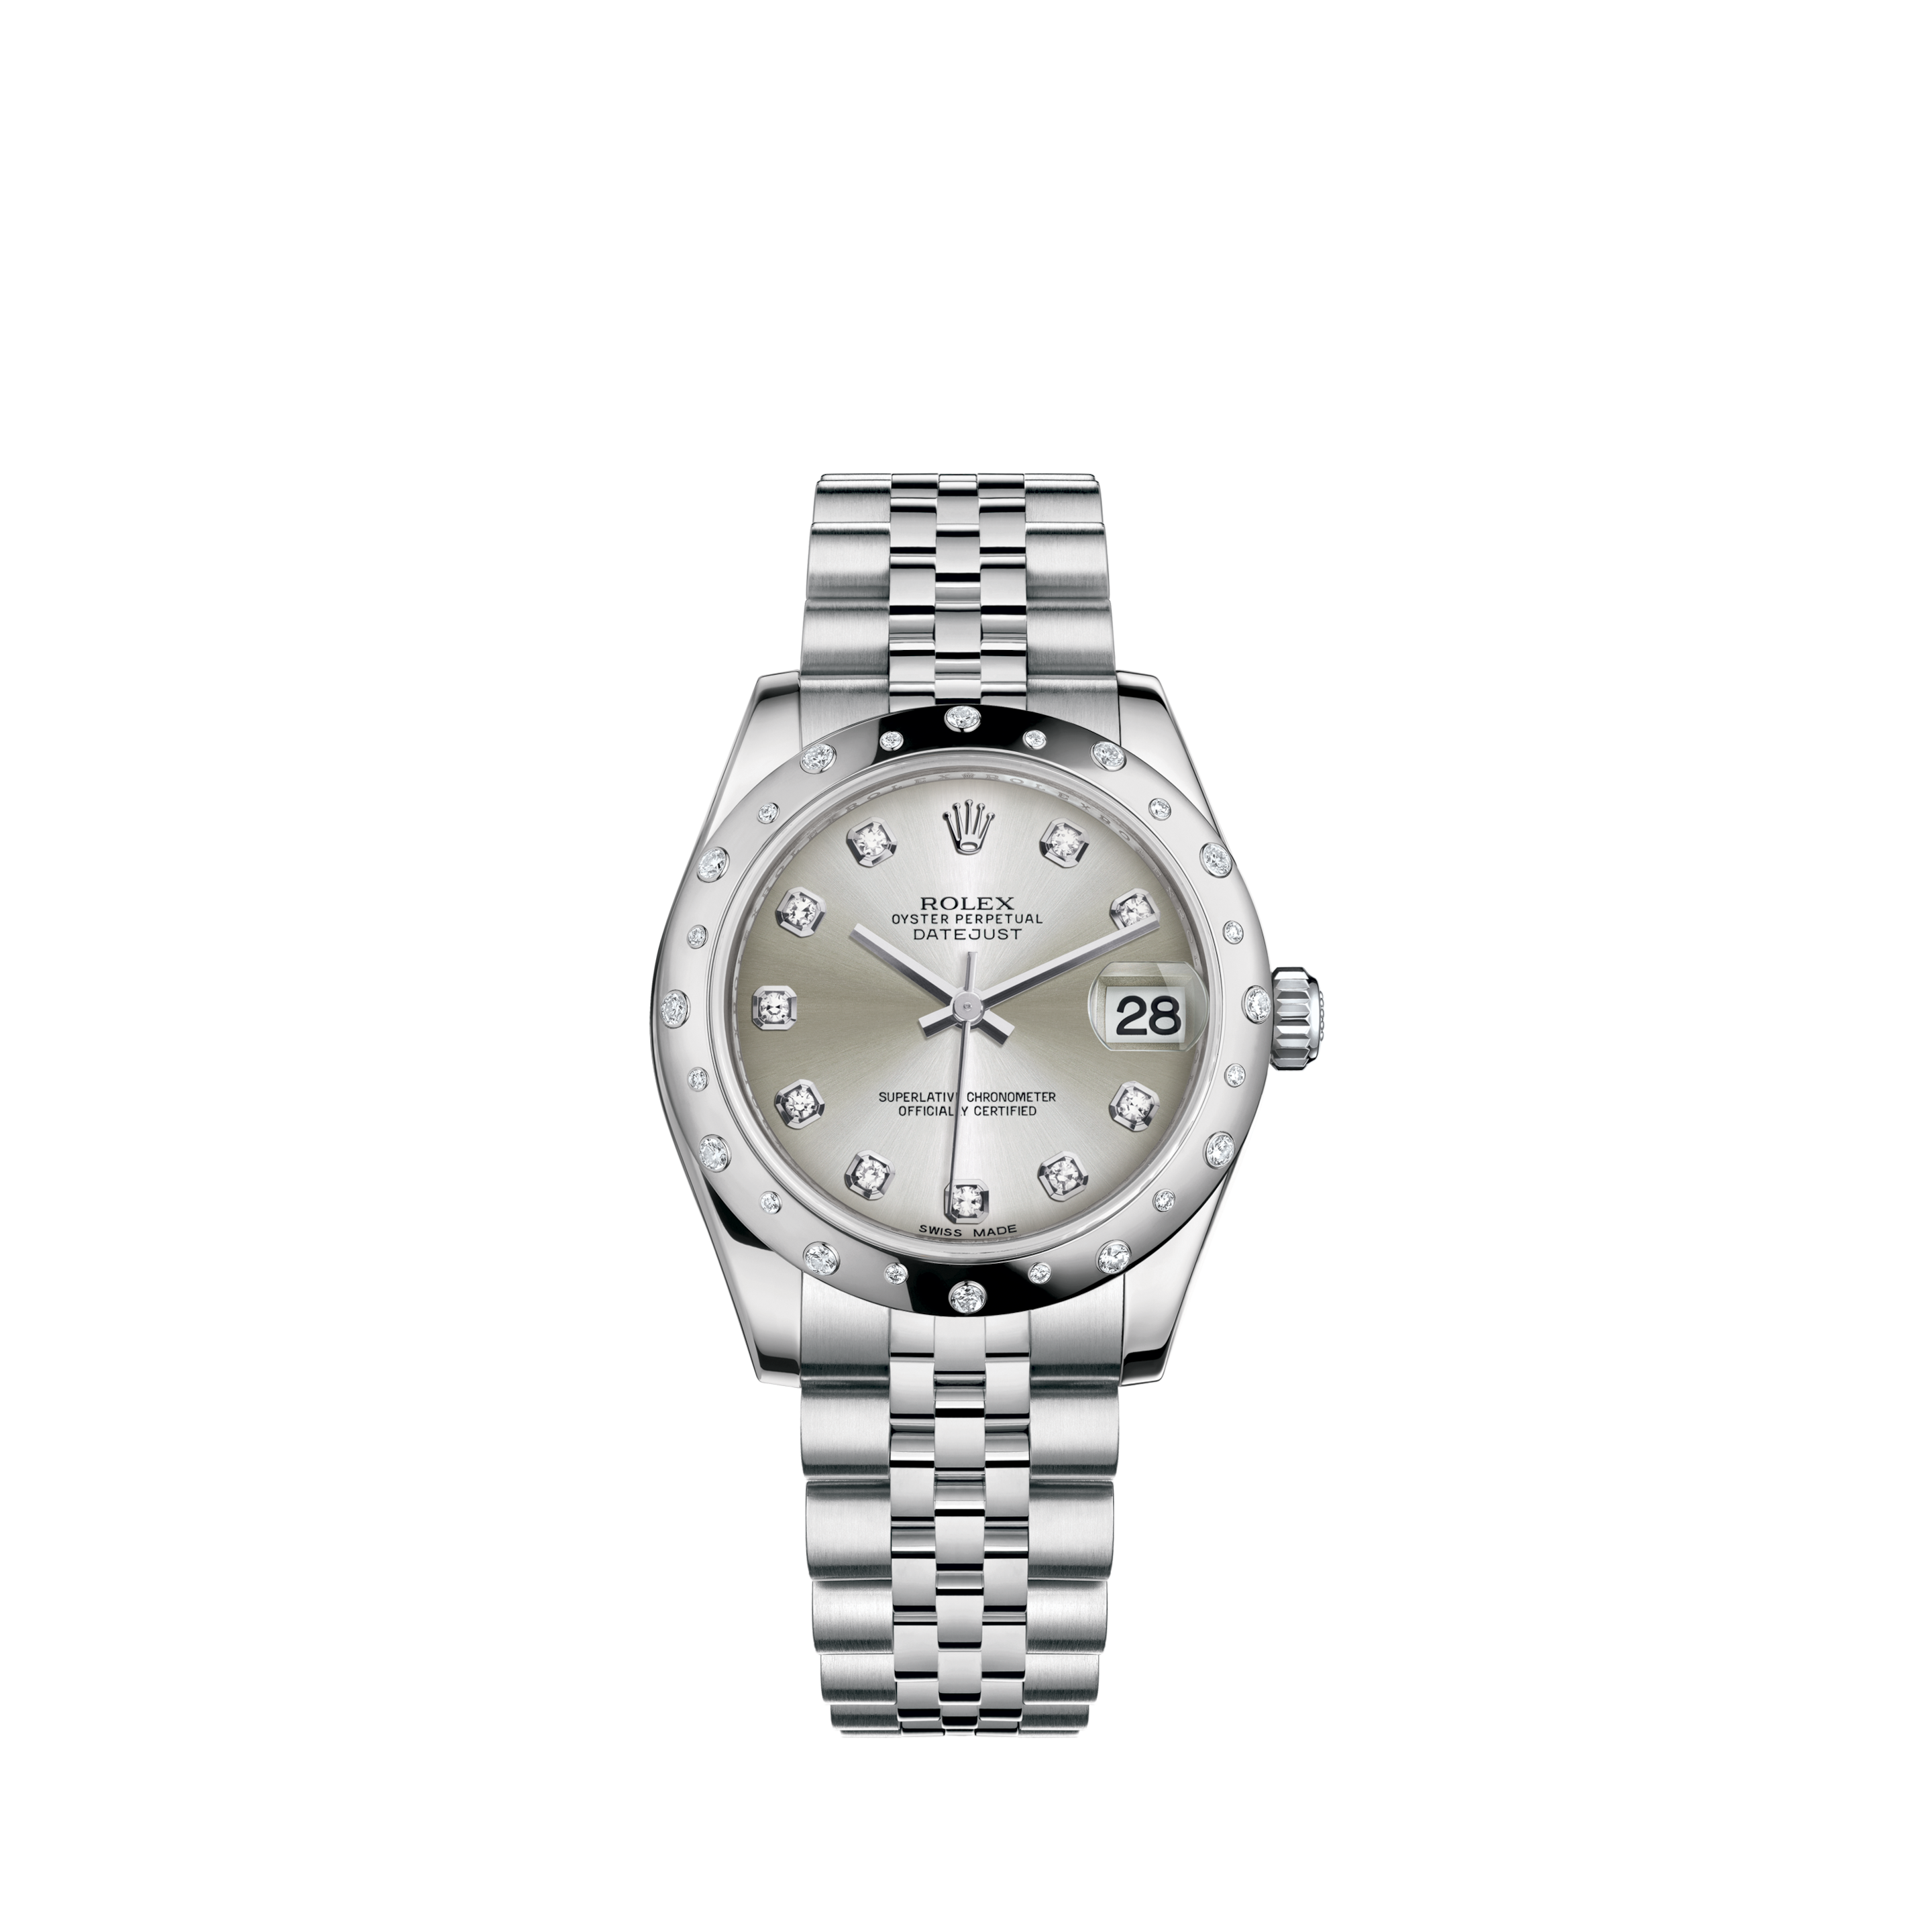 Rolex Datejust 26 Steel White Gold Silver Dial Ladies Watch 79174 Box PapersRolex Datejust 26 Steel White Gold Silver Roman Dial Ladies Watch 69174